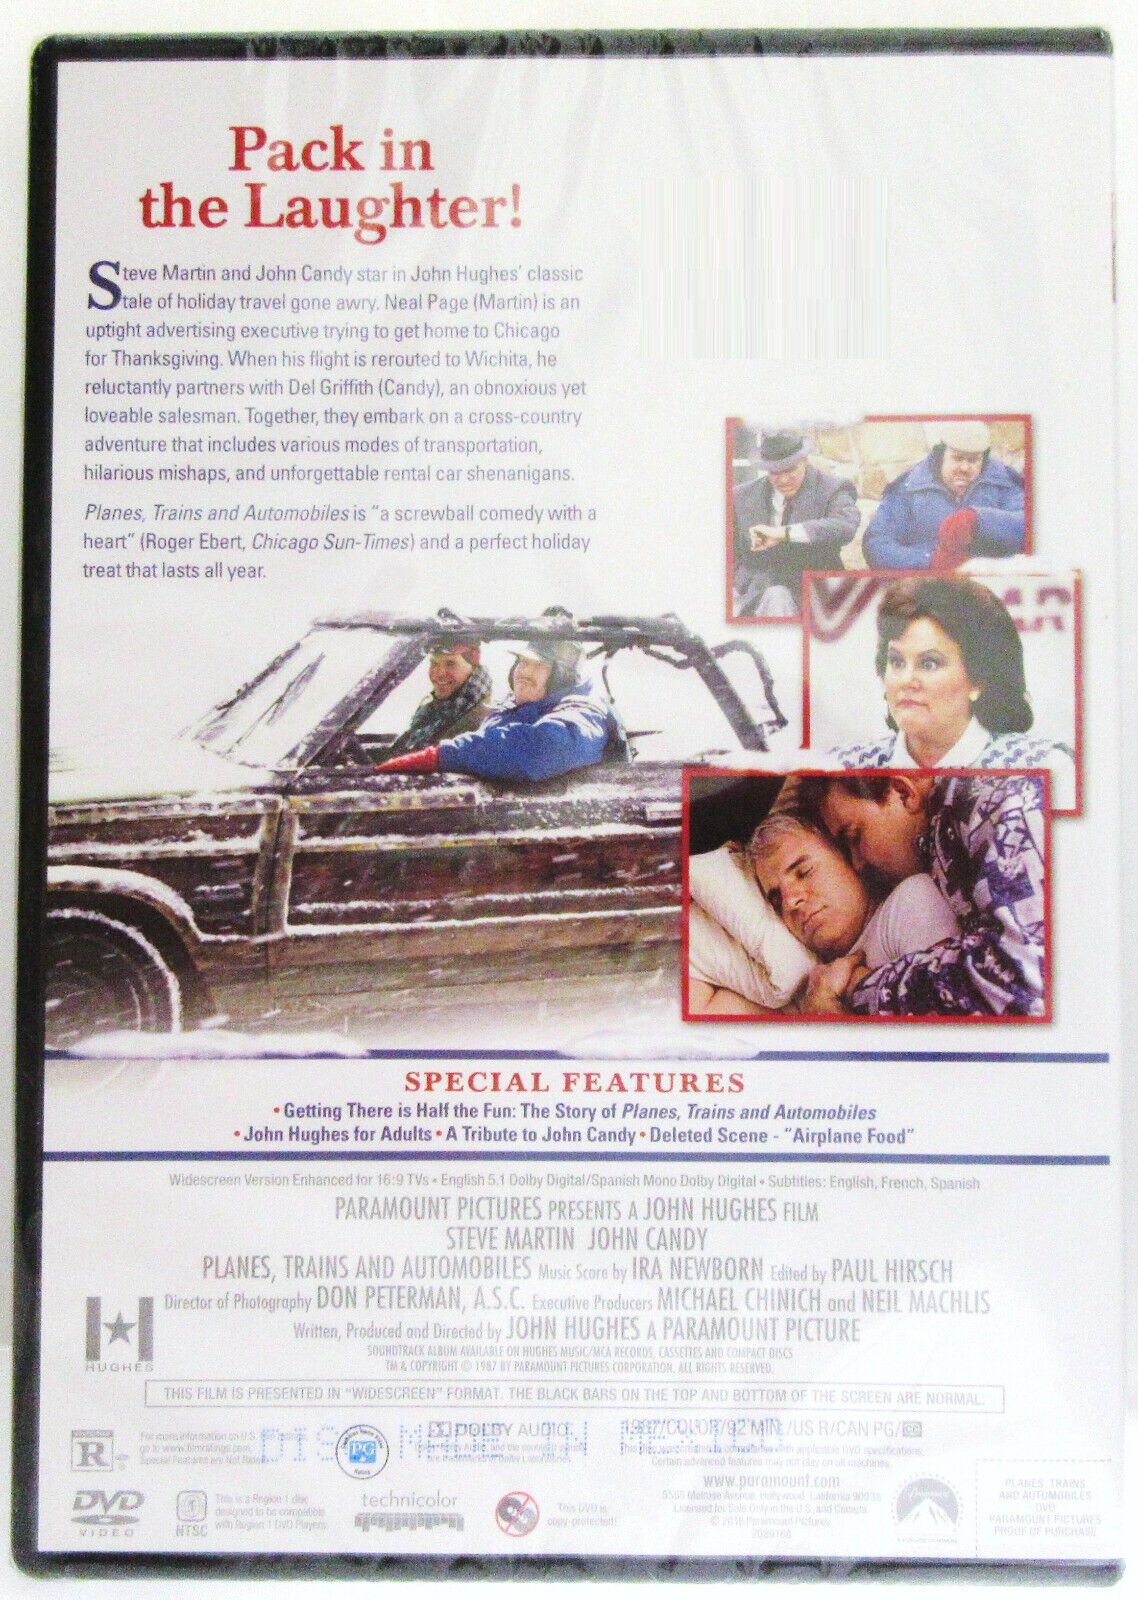 Planes, Trains and Automobiles ~1987~ Steve Martin, John Candy ~ Movie ~ New DVD